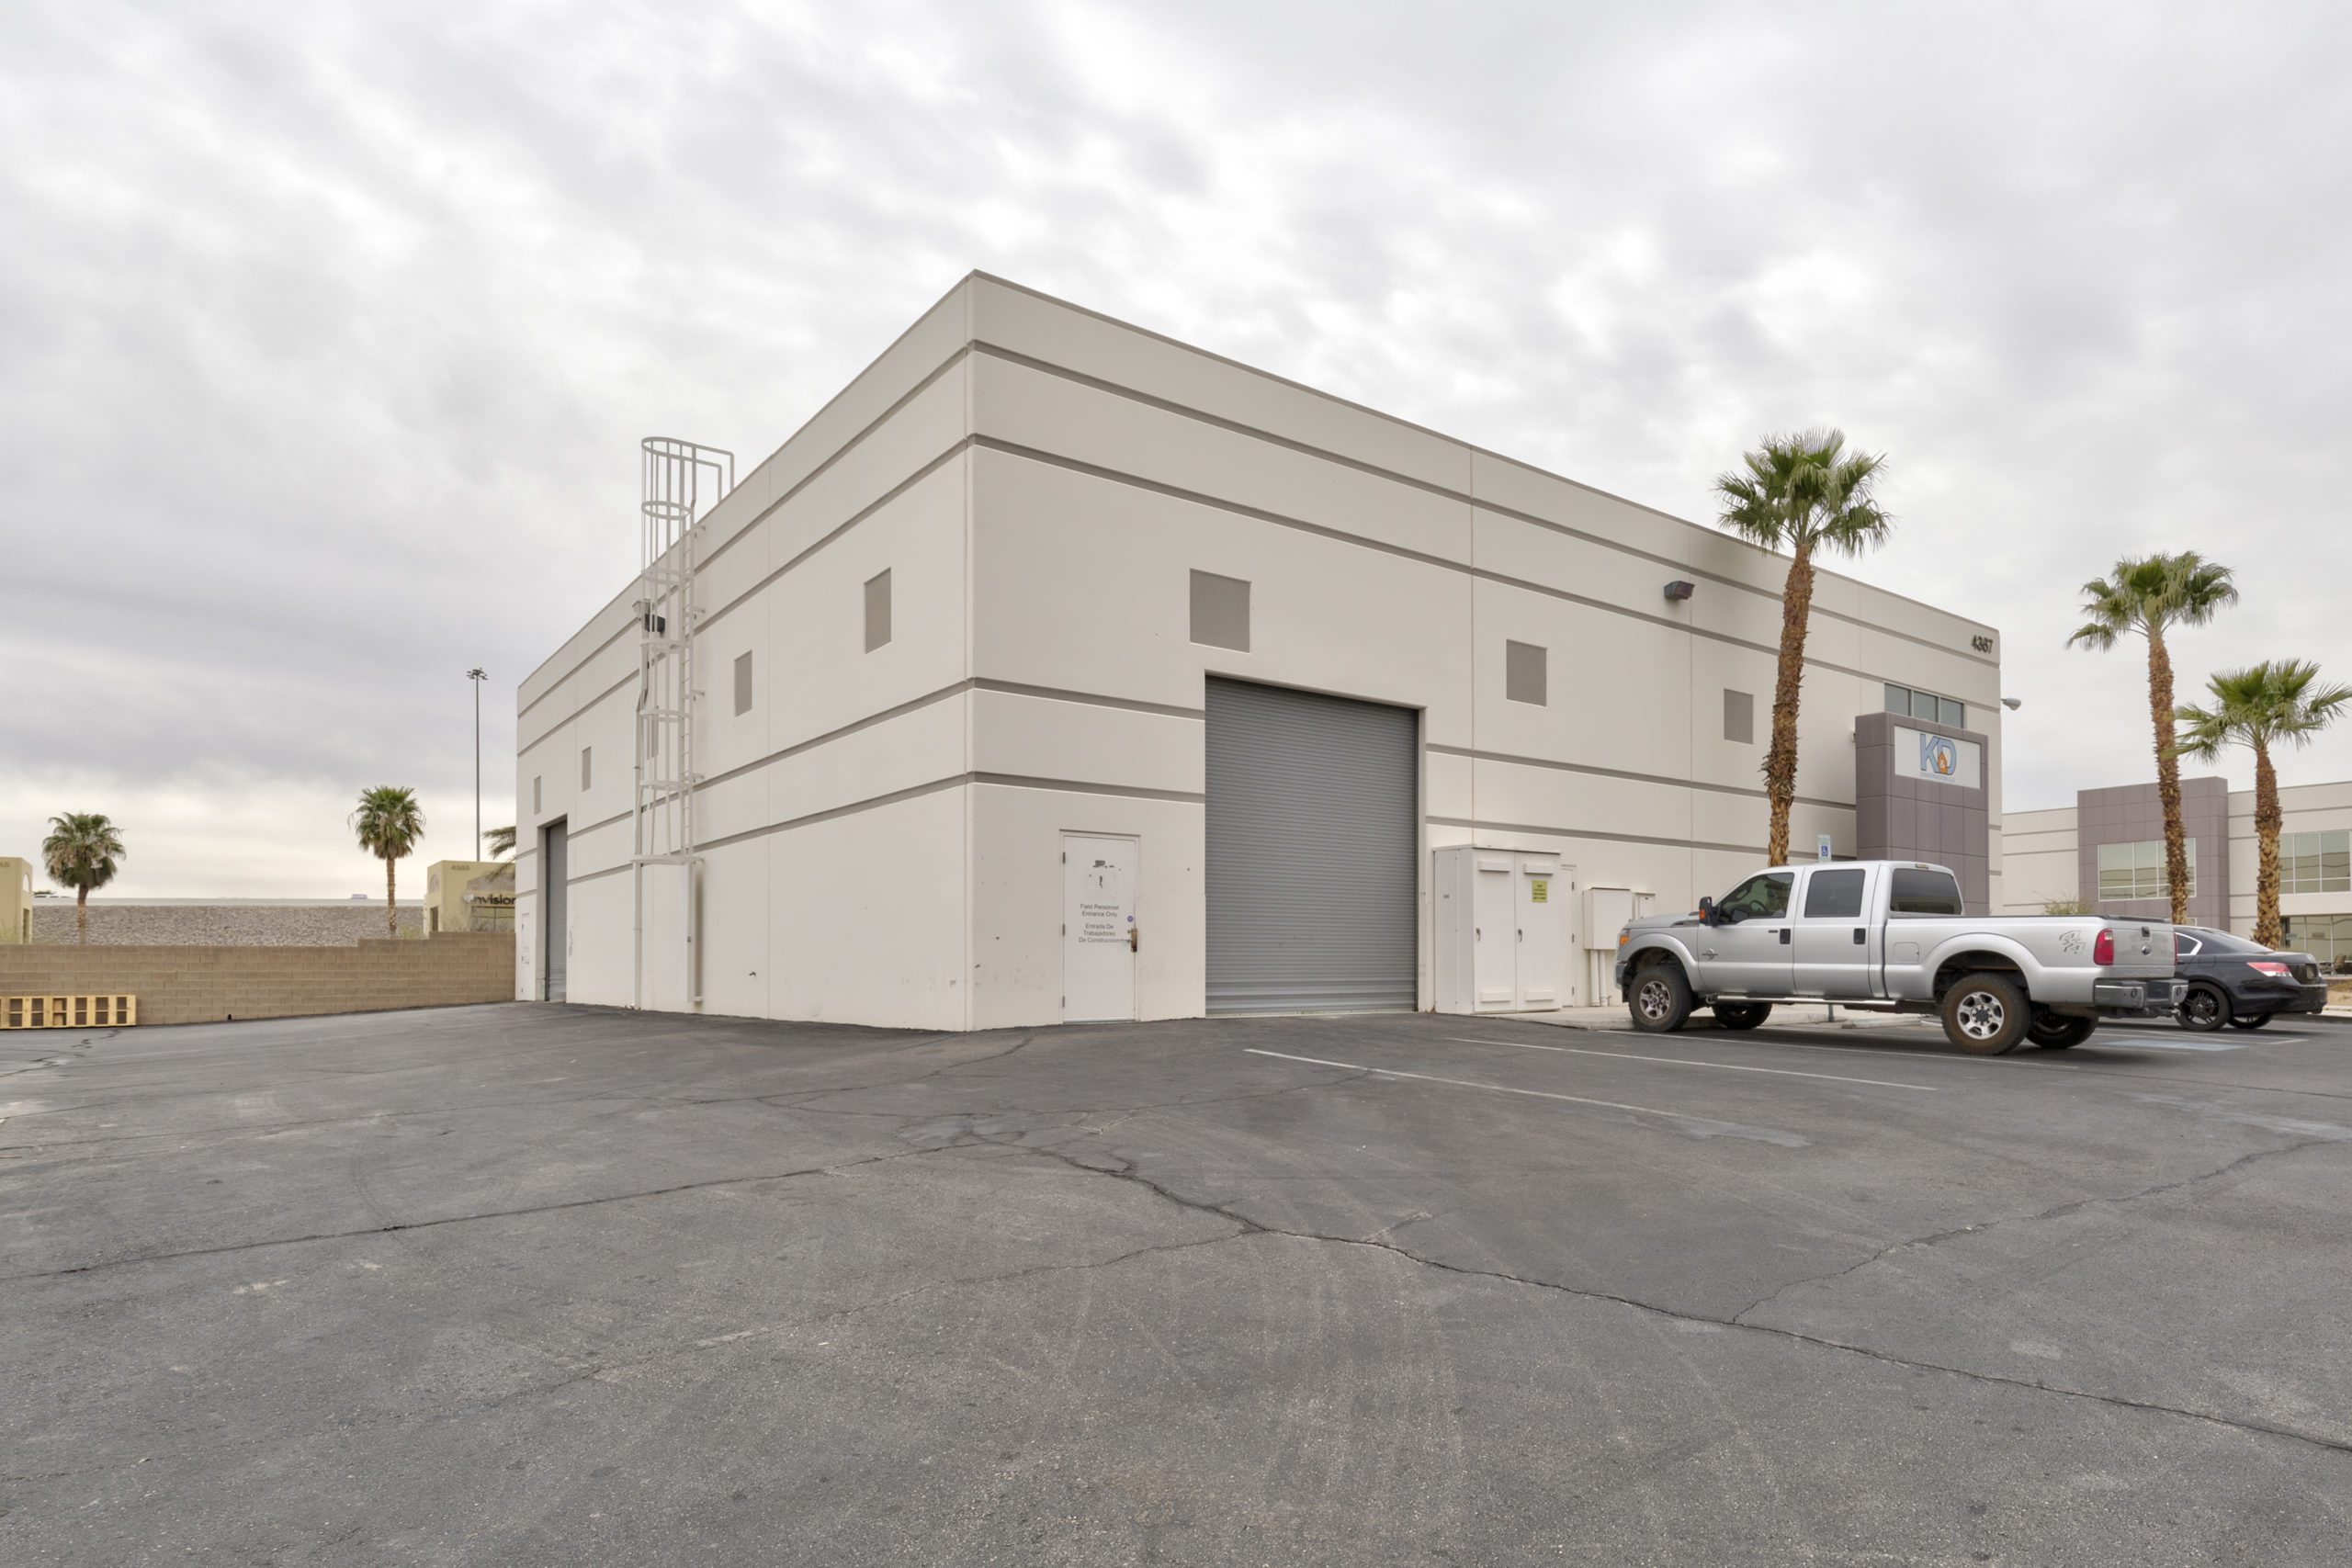 Commercial building located off of sunset rd in Las Vegas